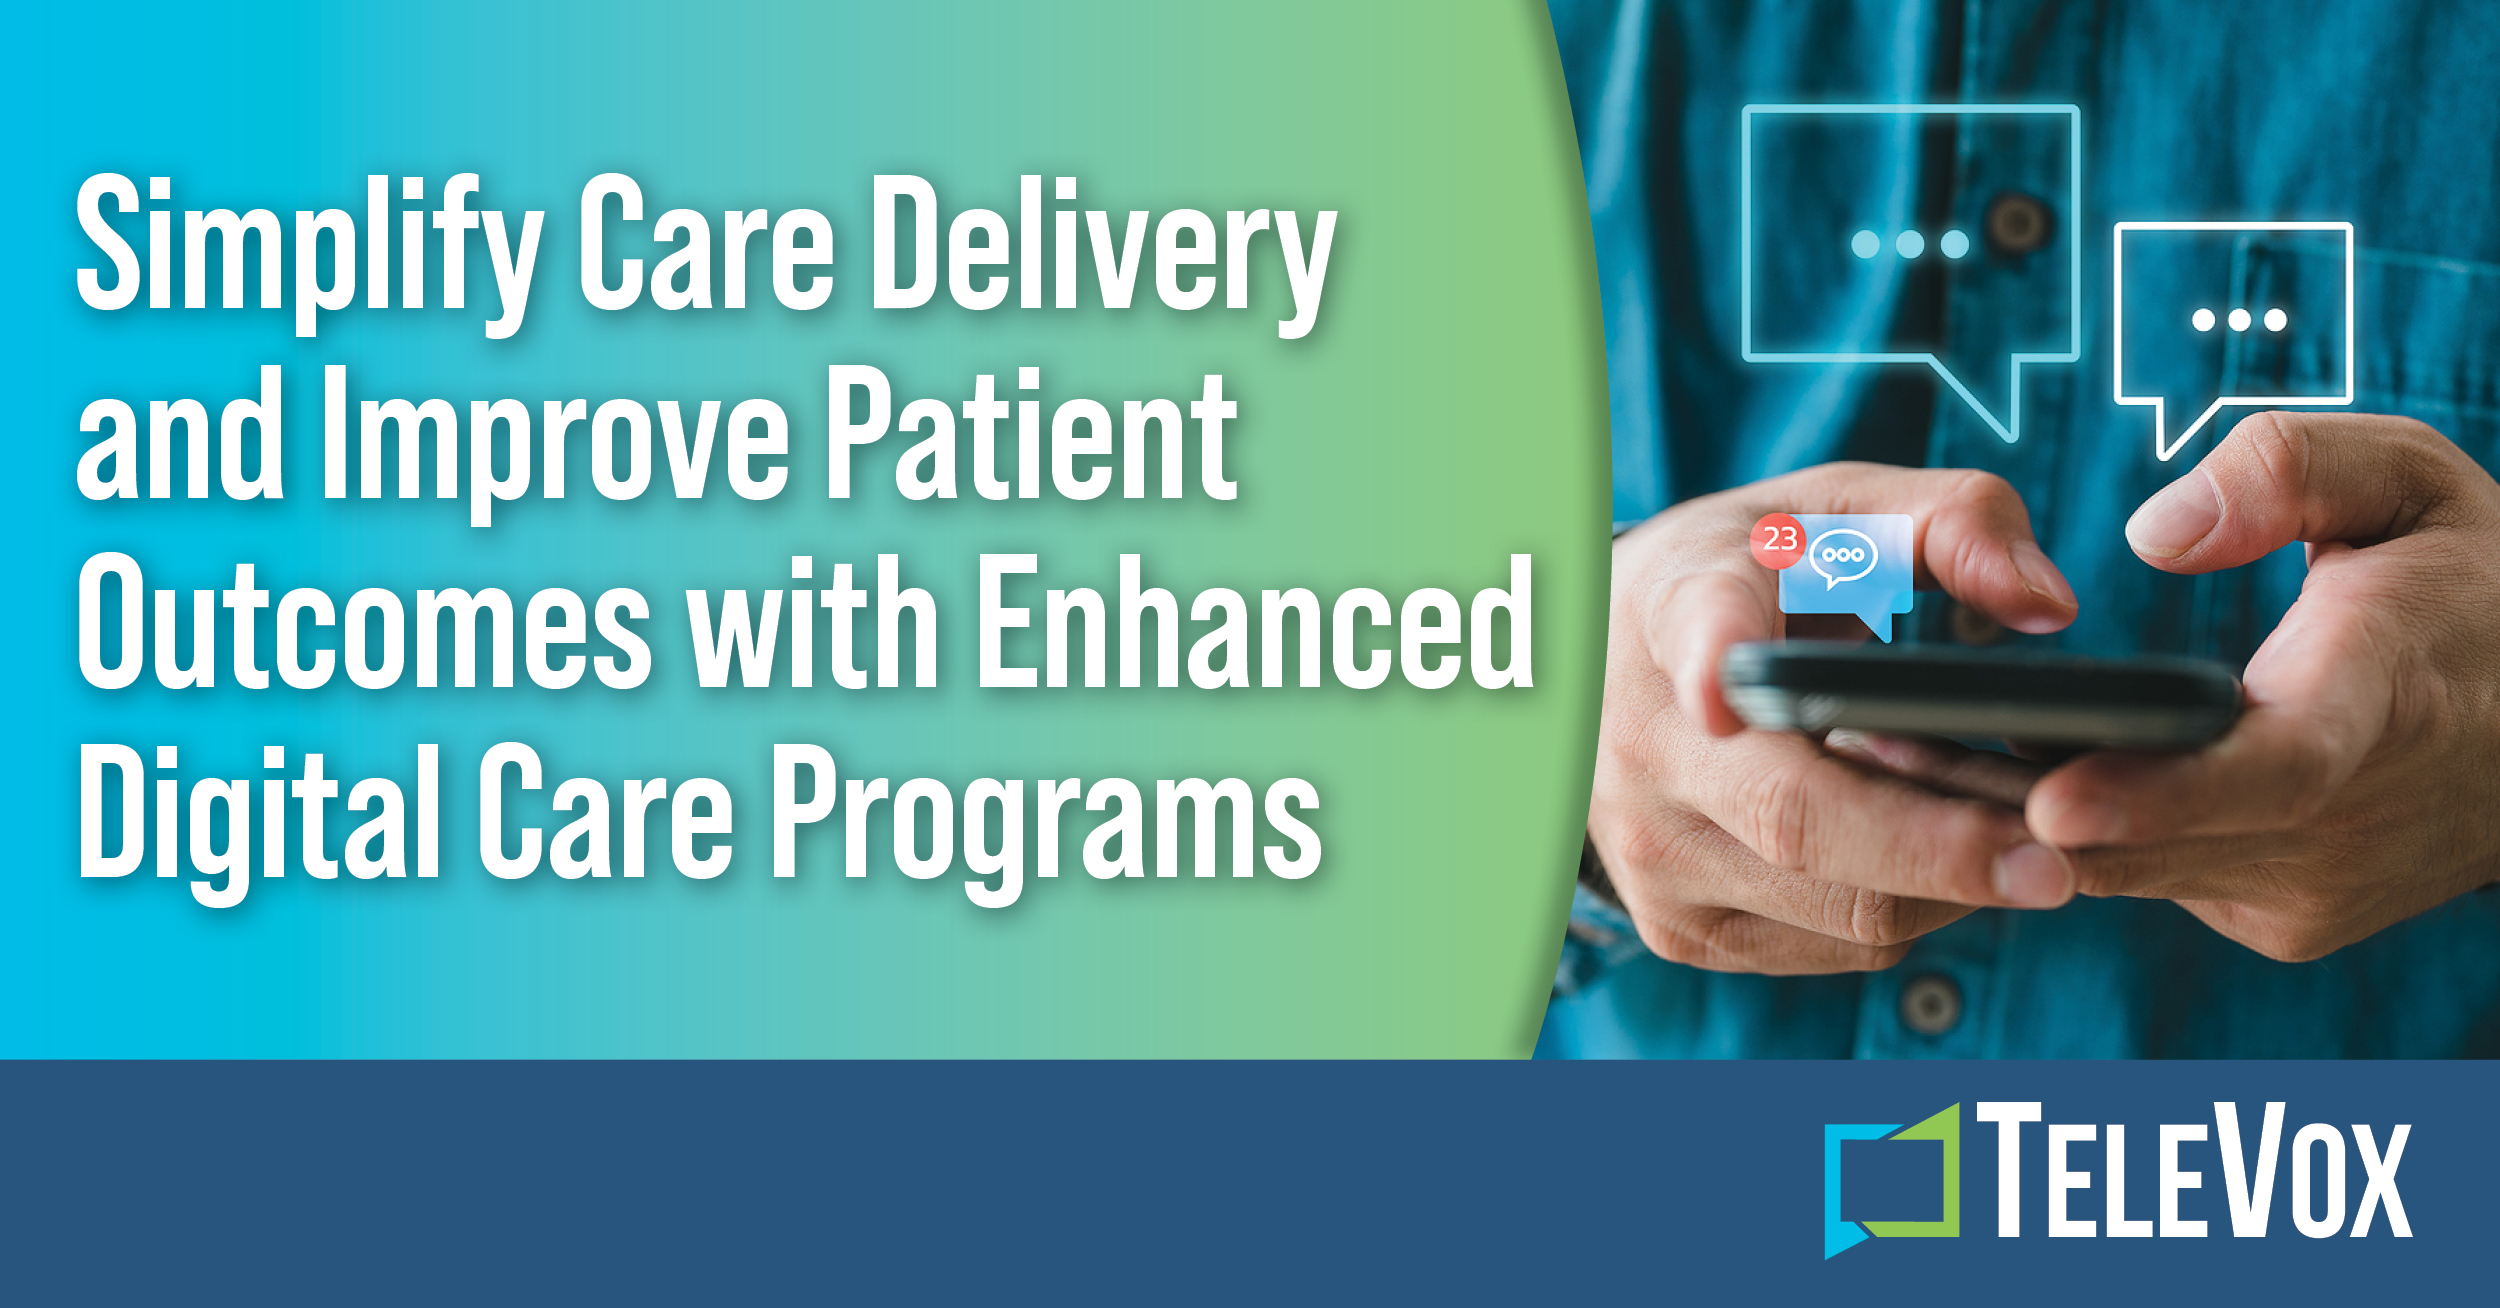 TeleVox Simplifies Care Delivery and Improves Patient Outcomes with Enhanced Digital Care Programs